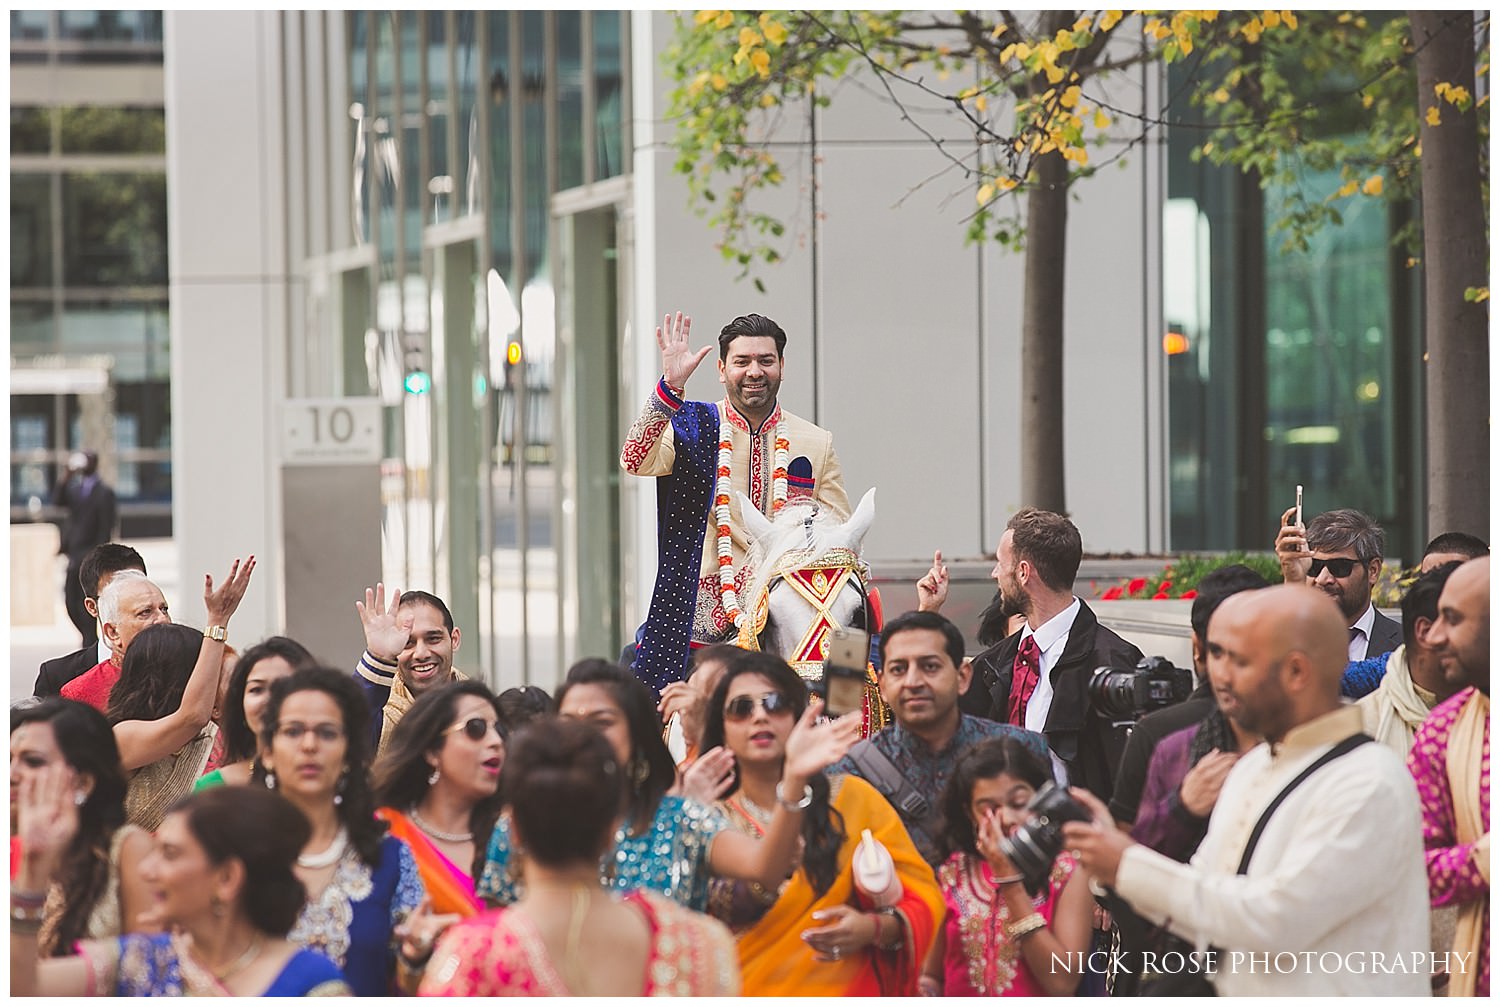  Hindu Baraat and the groom's Indian wedding entrance on a horse in Canary Wharf London 